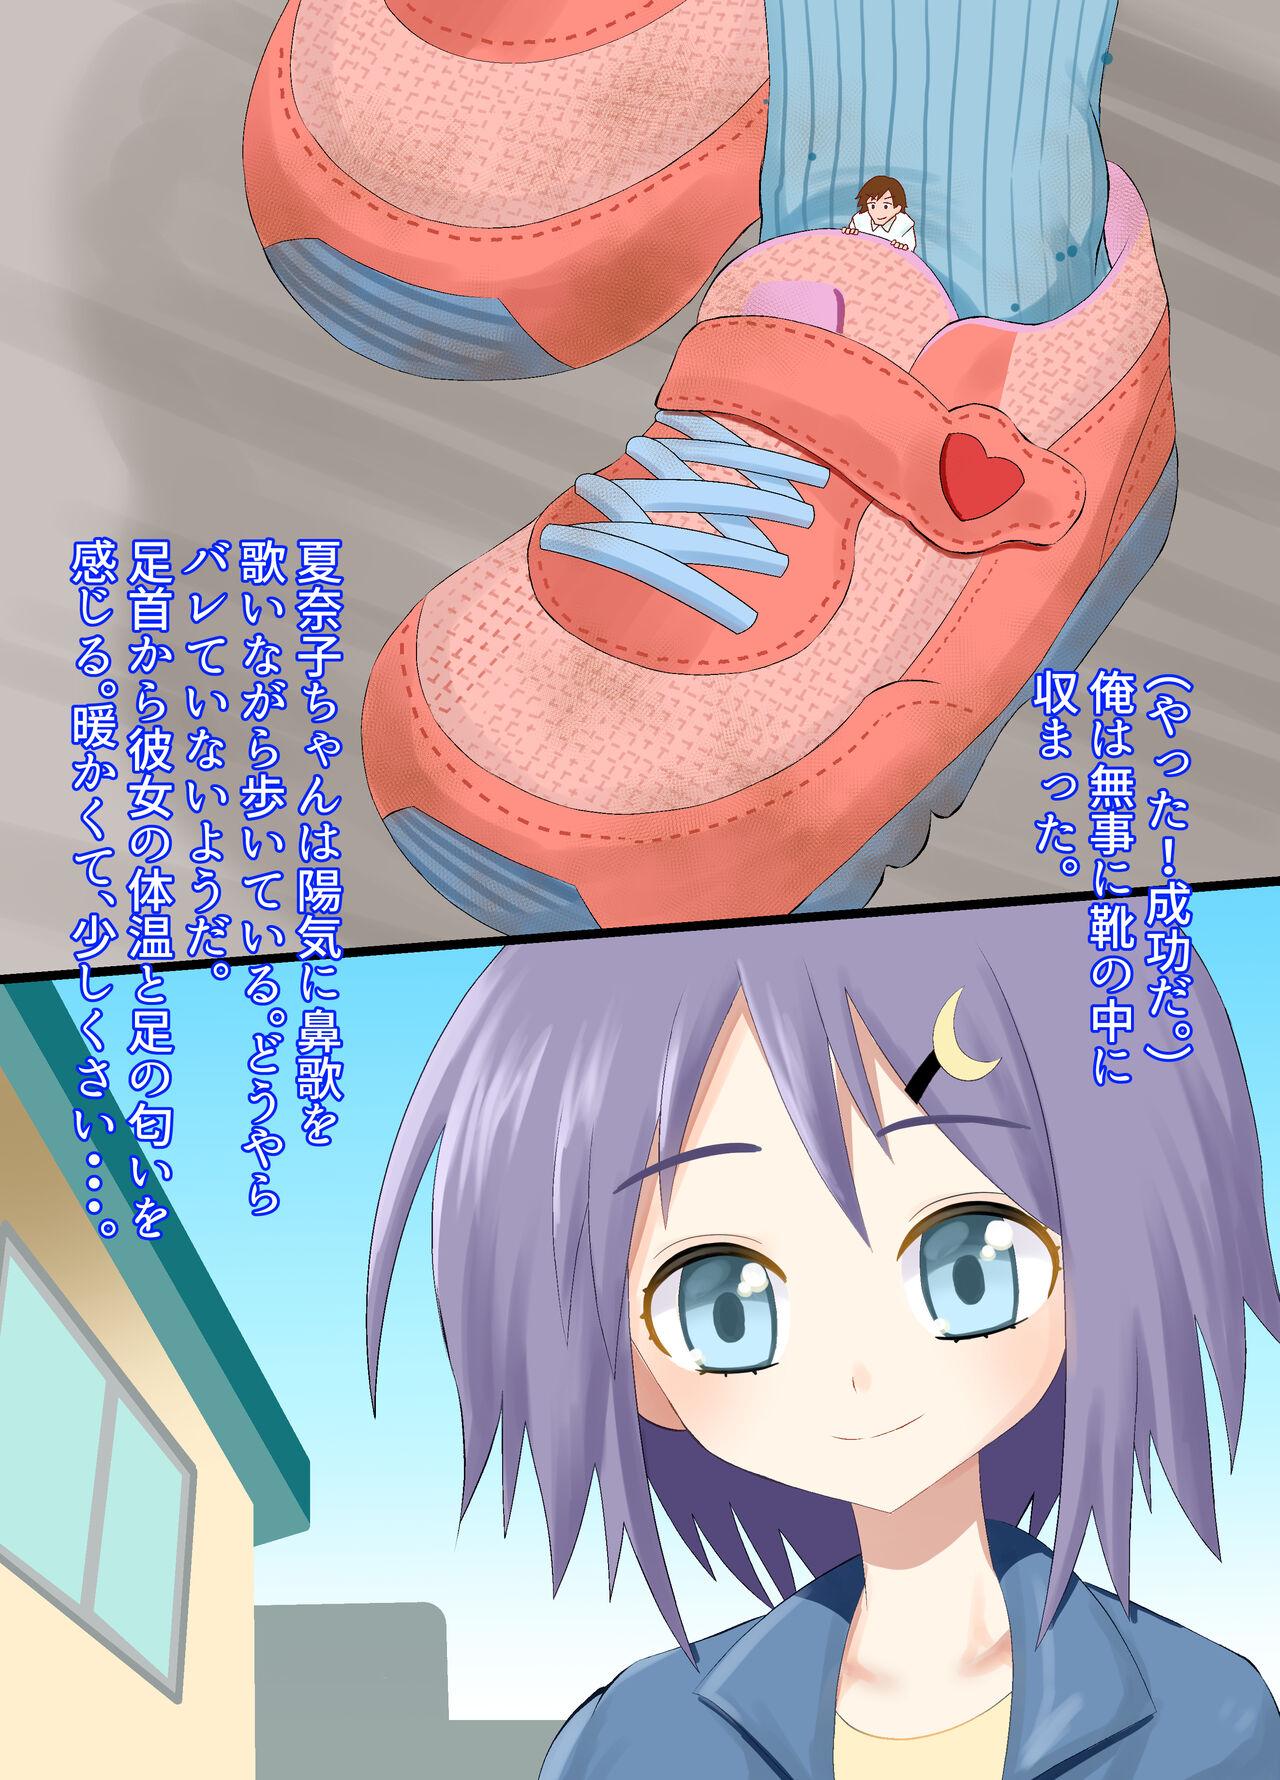 A CG collection of getting smaller and being stepped on by a girl 6